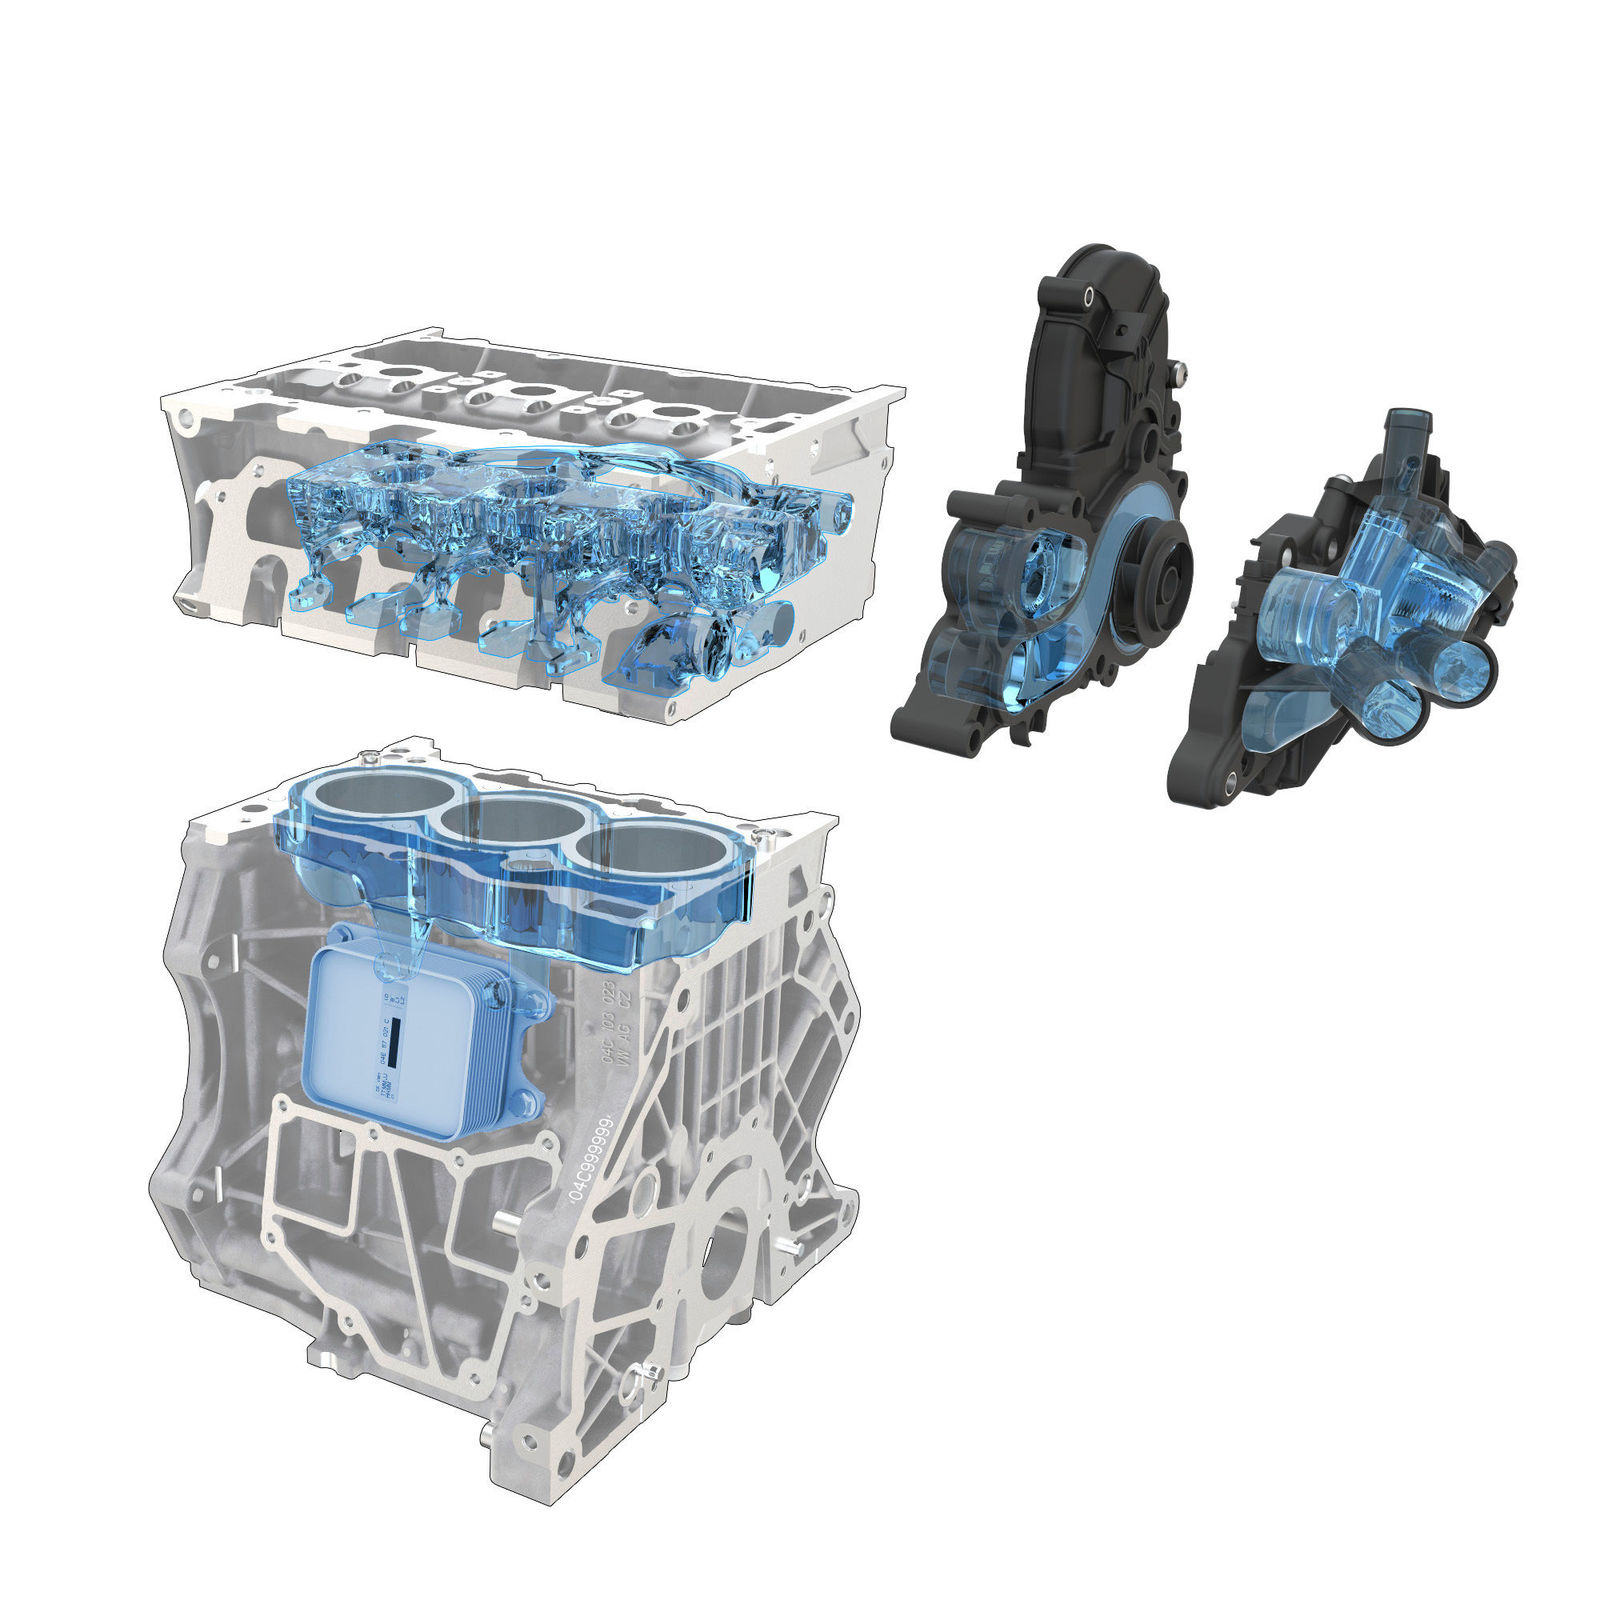 1.0 TSI engine (three cylinder, cooling-water jacket crankcase/cylinder head and water pump module)